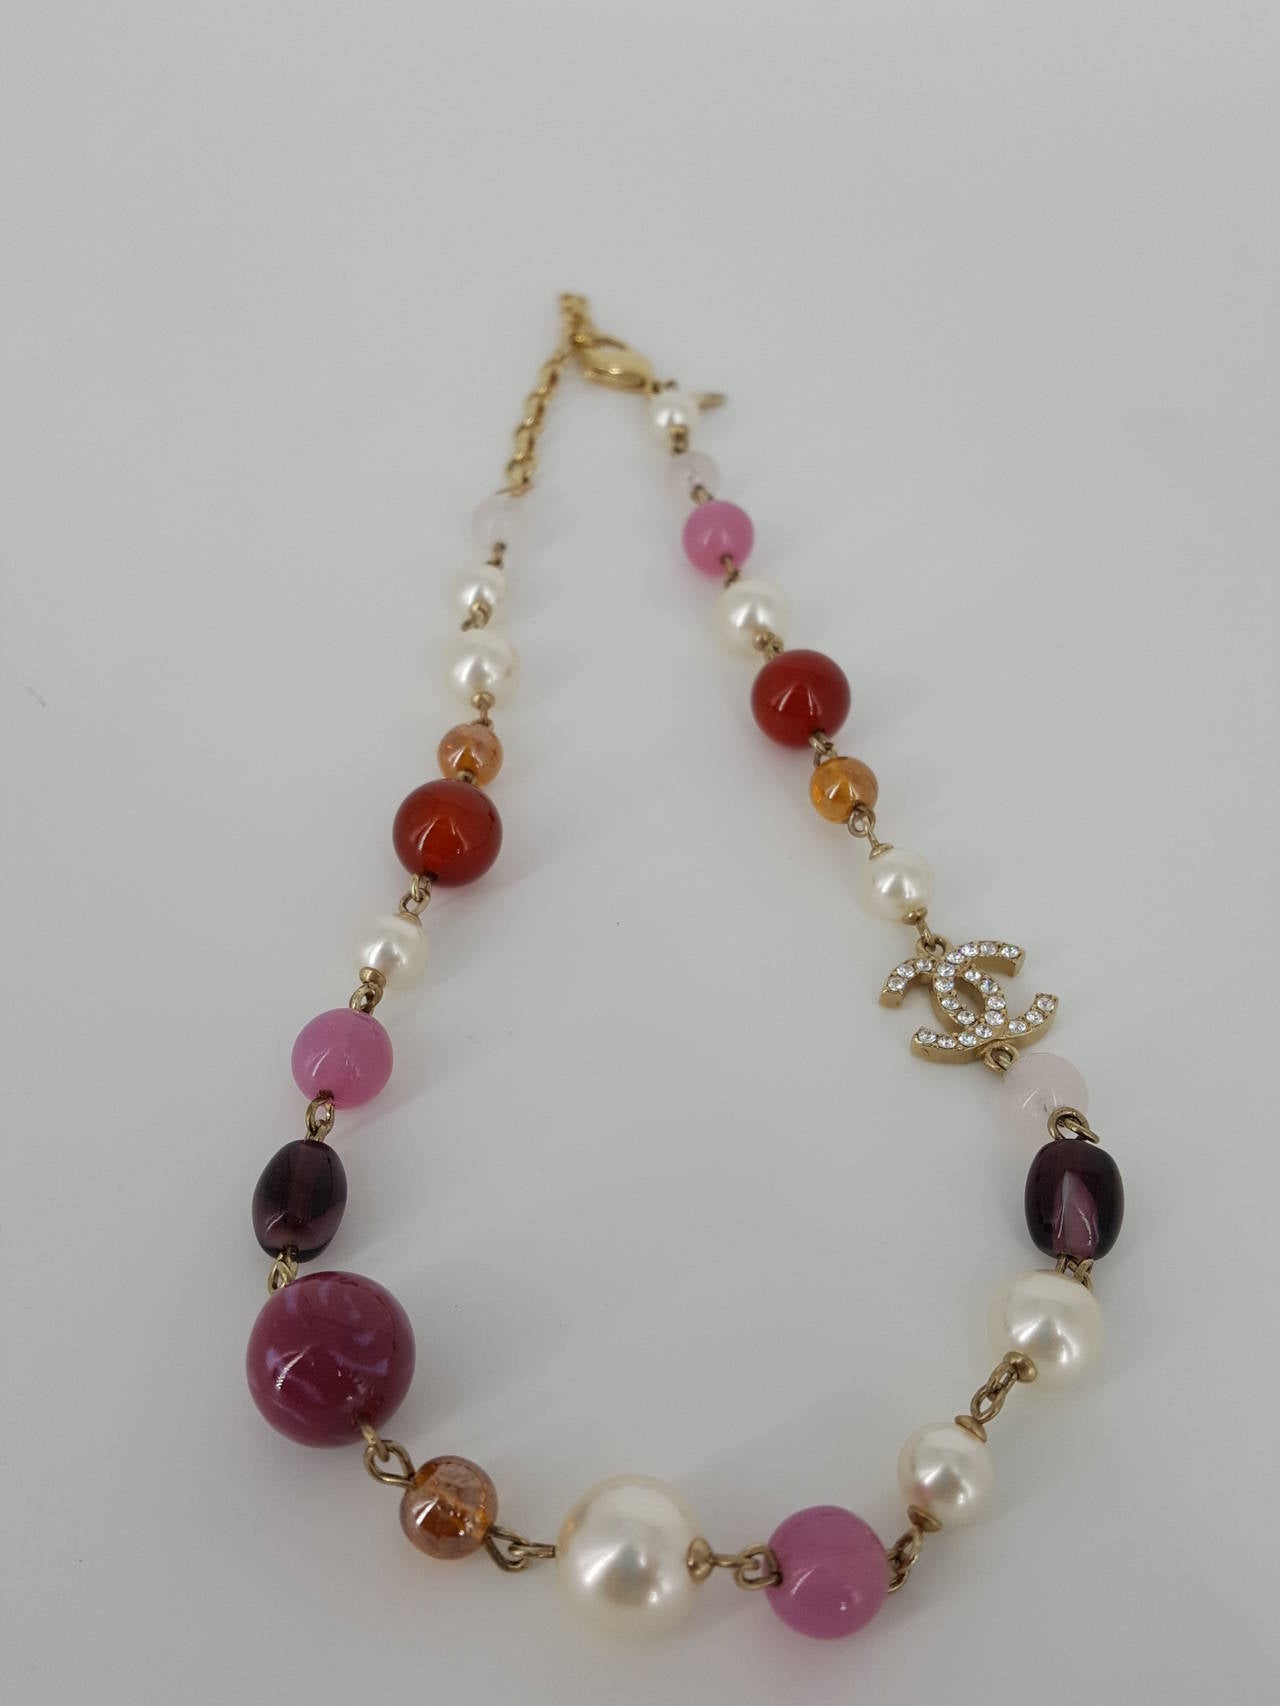 Offered for sale is this CHANEL Choker necklace with a lovely combination of glass beads and pearls with a double sided Rhinestone CC which lays on the one side.  The glass beads resemble semi precious quartz, rose quarts, amethyst, carnelian, and